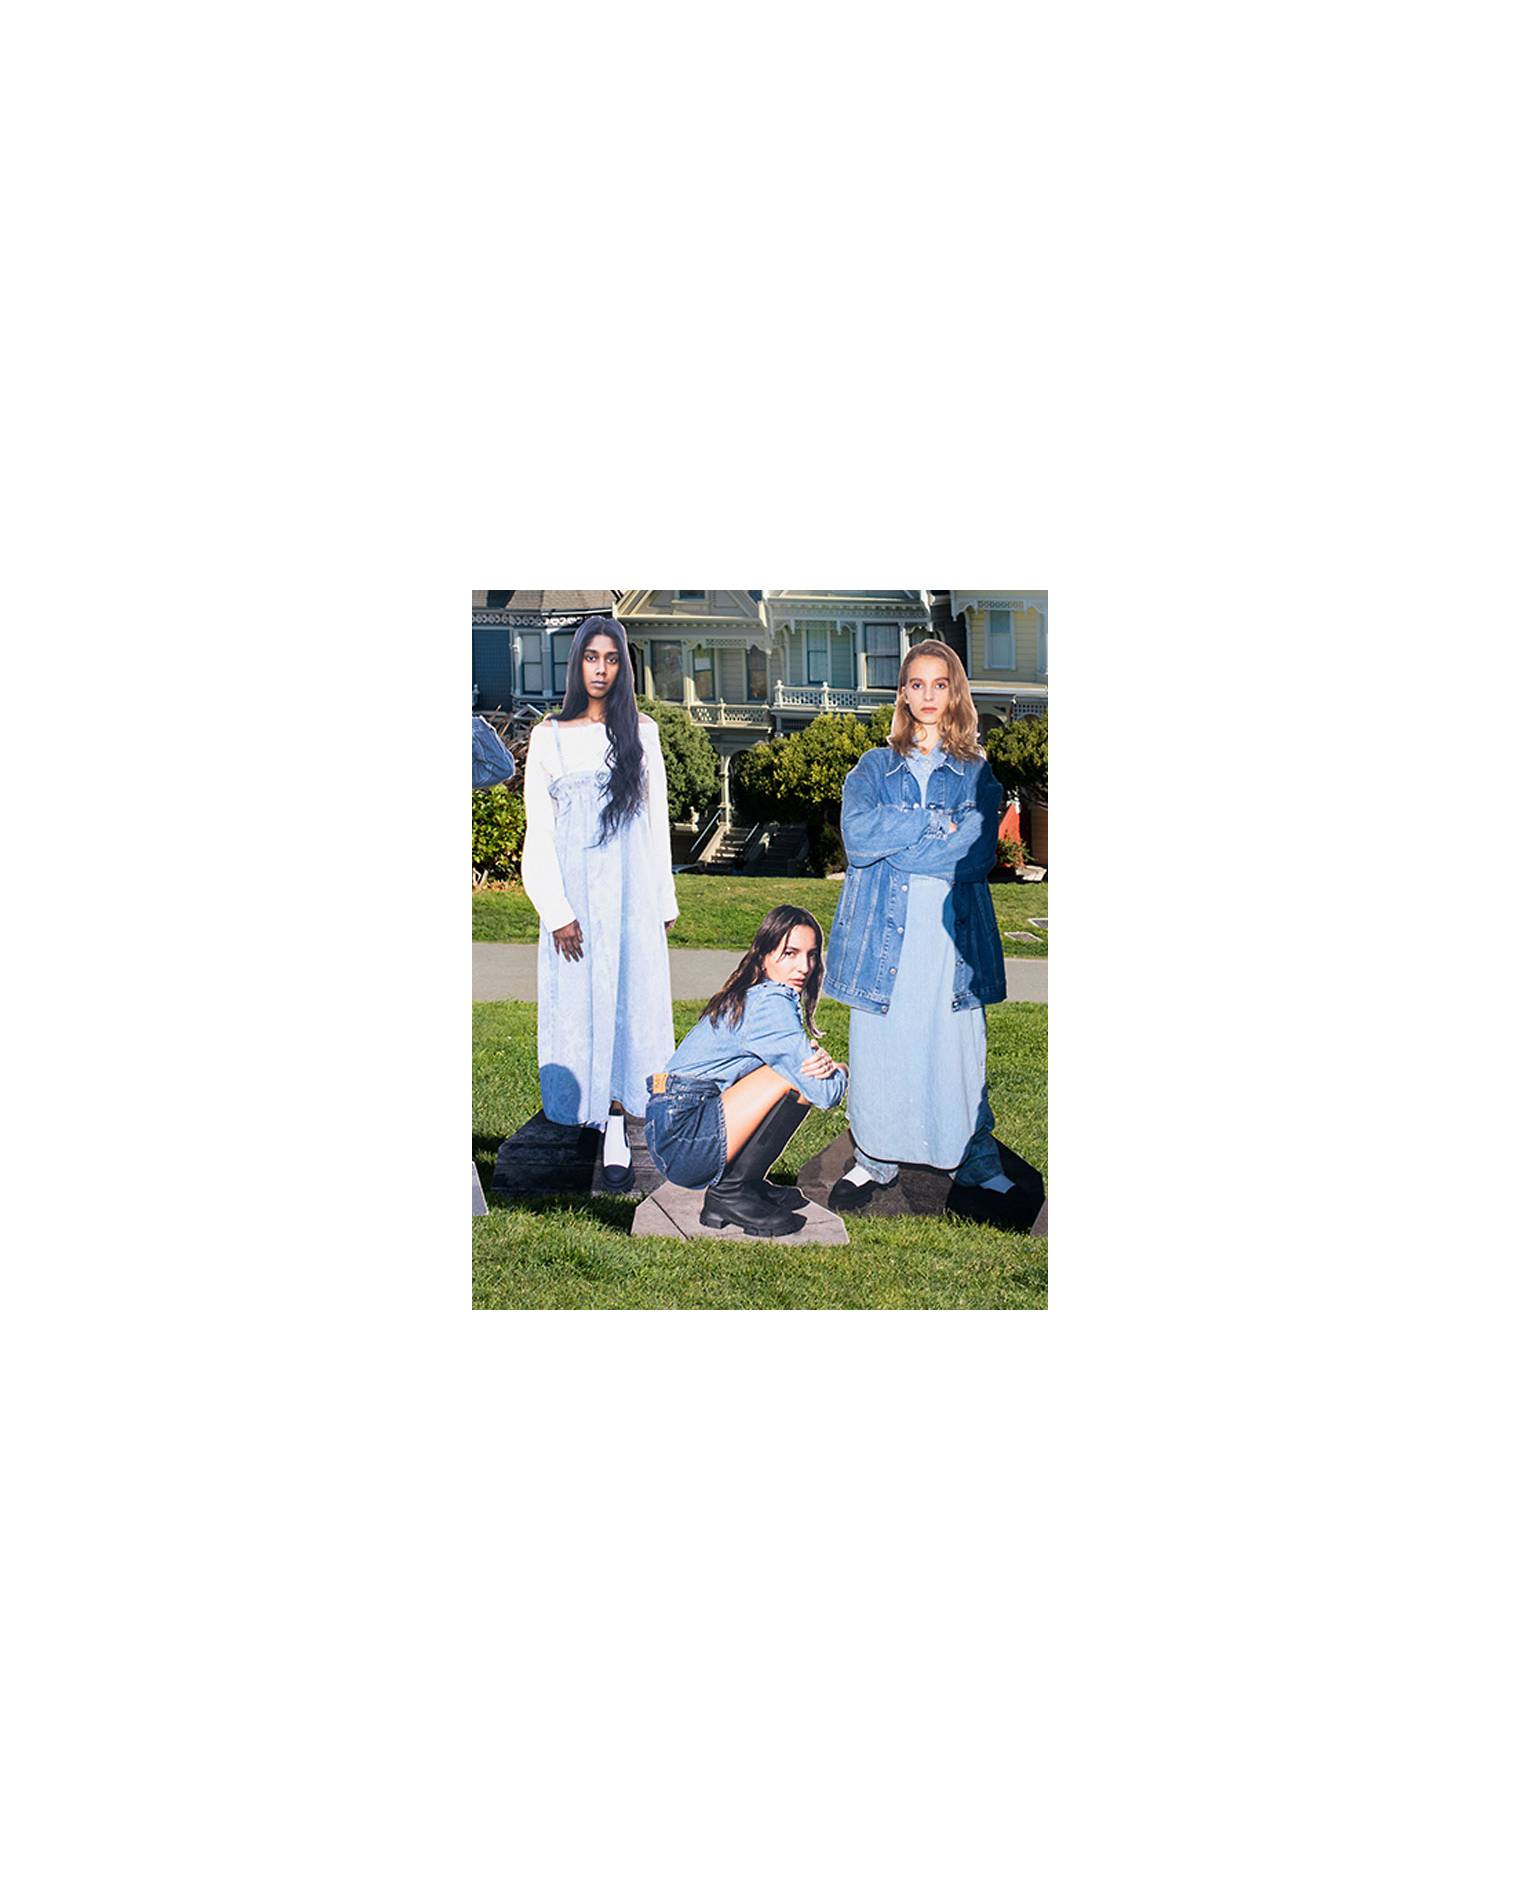 Five cutouts of models wearing outfits from Levi's x Ganni collection photographed in a green field in San Francisco in front of houses.